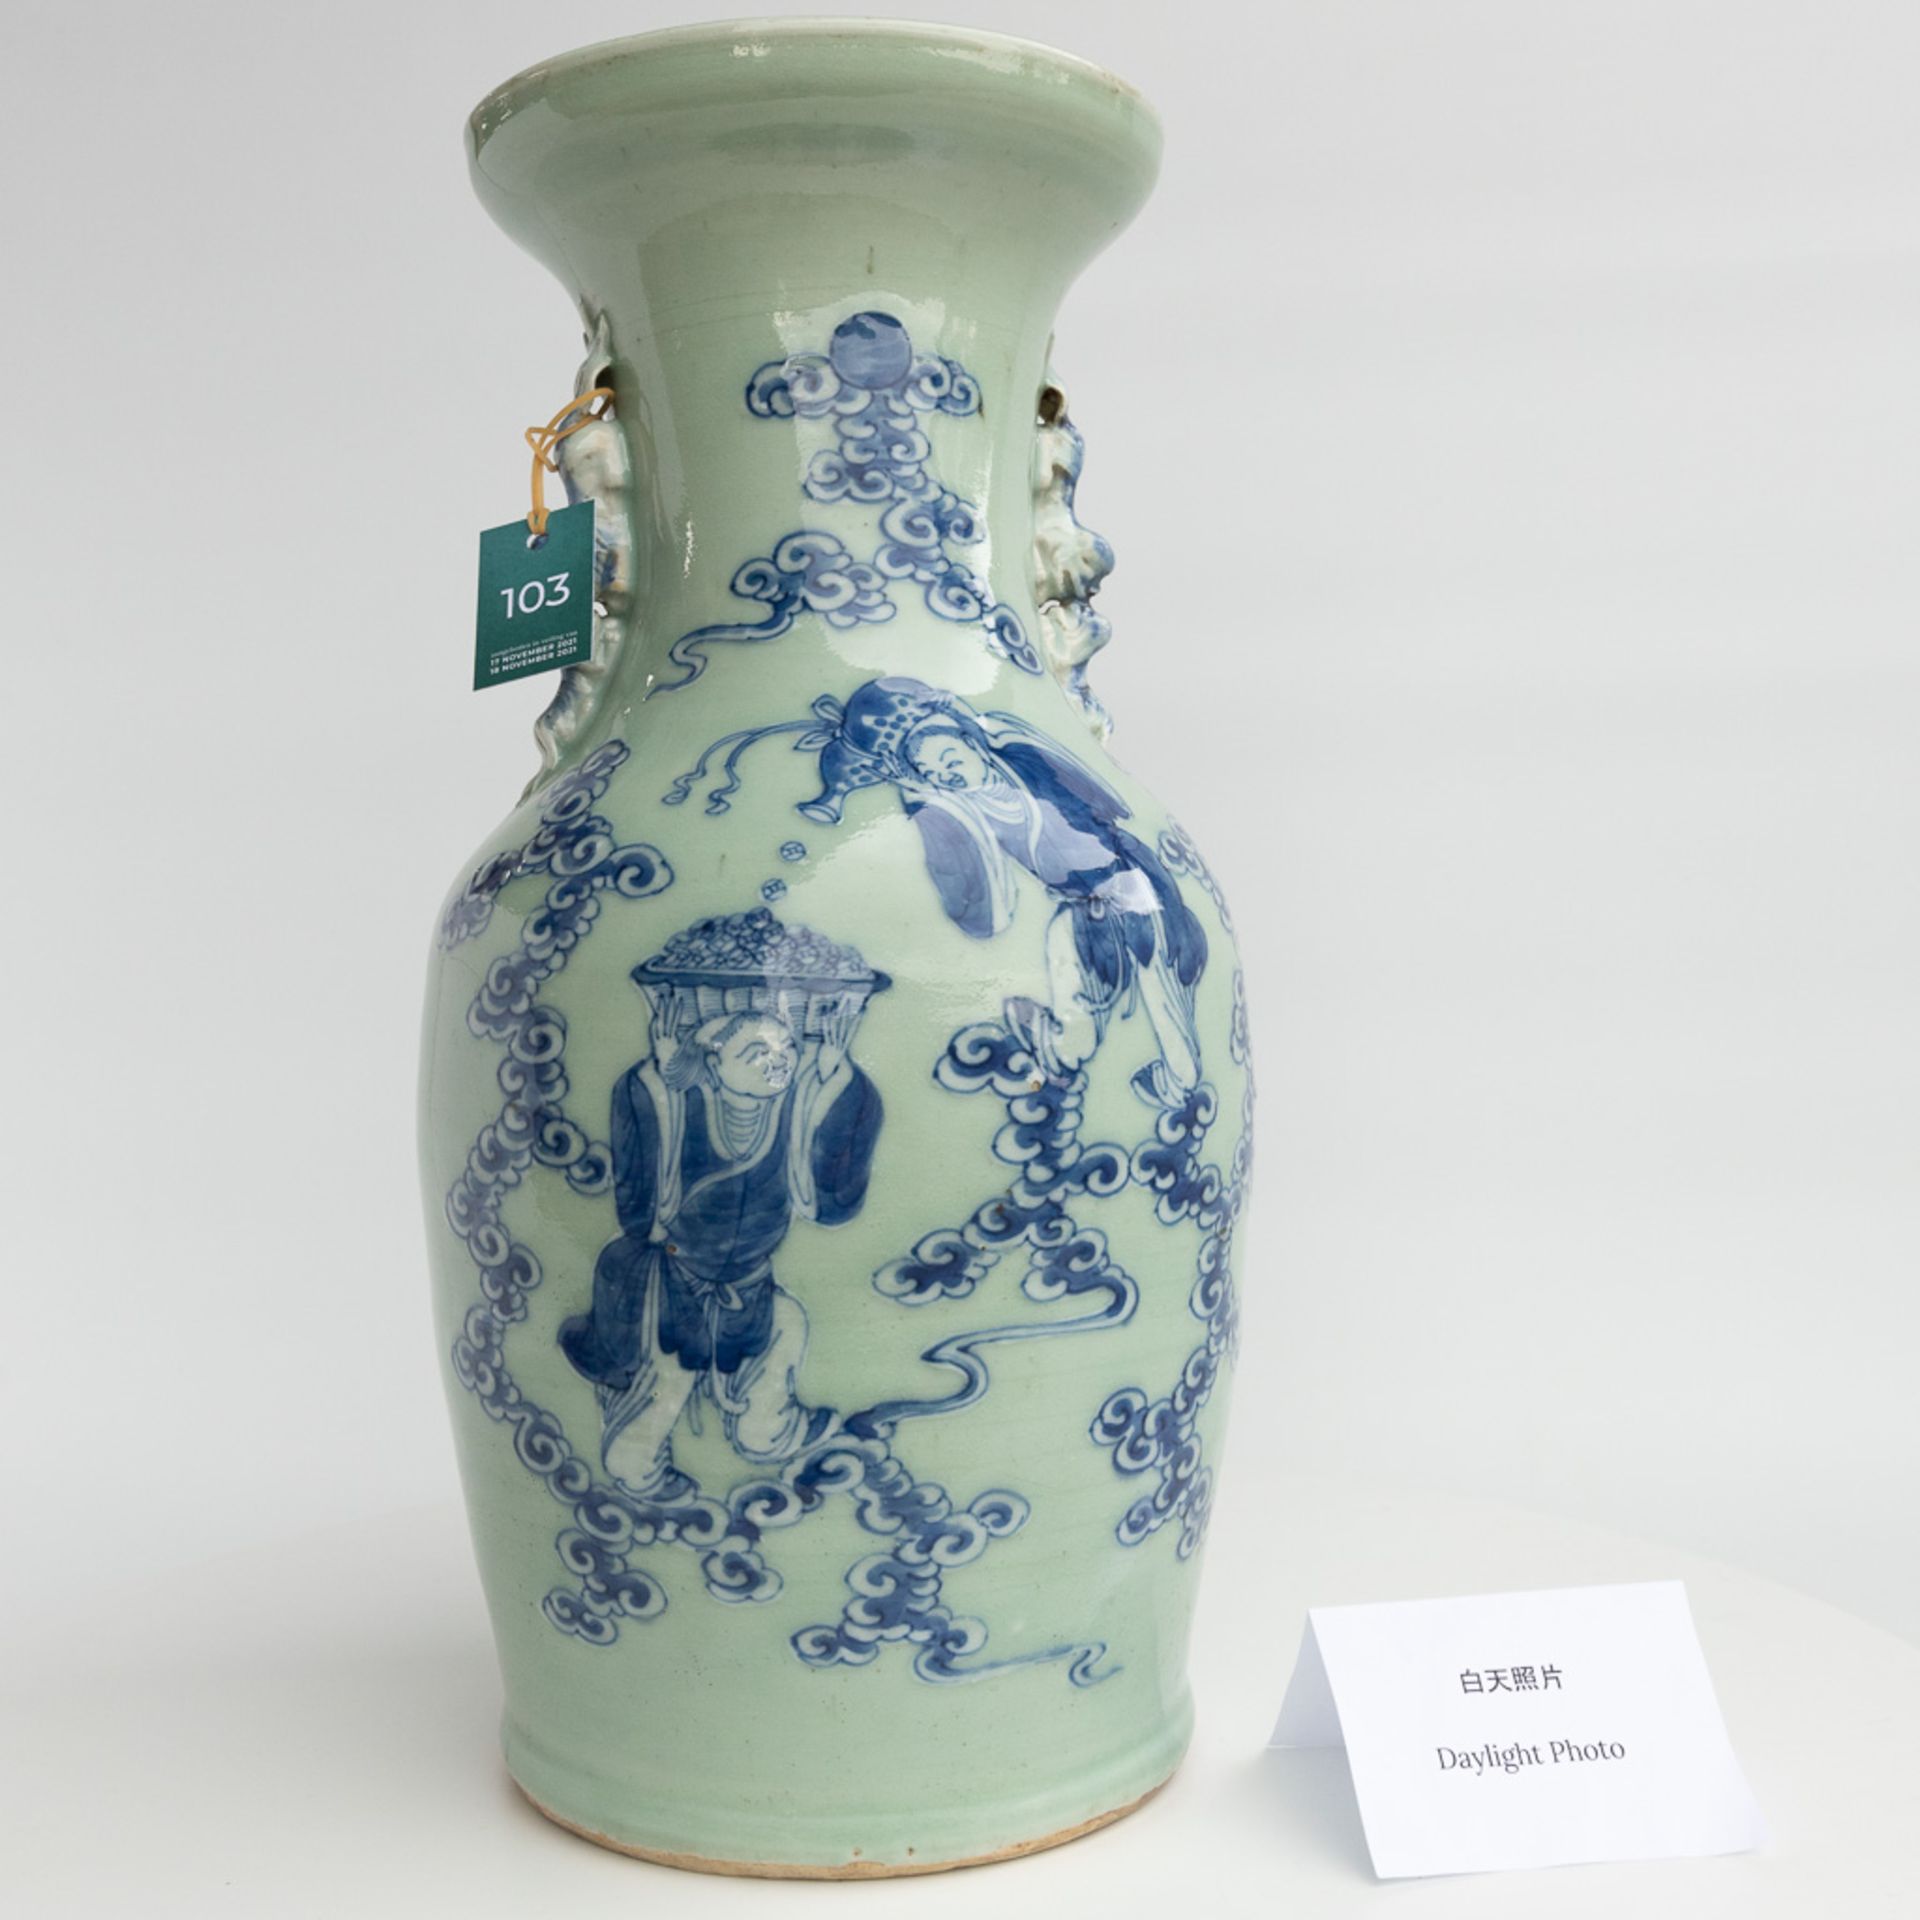 A vase made of Chinese porcelain with a blue-white decor. 19th/20th century. - Image 12 of 14